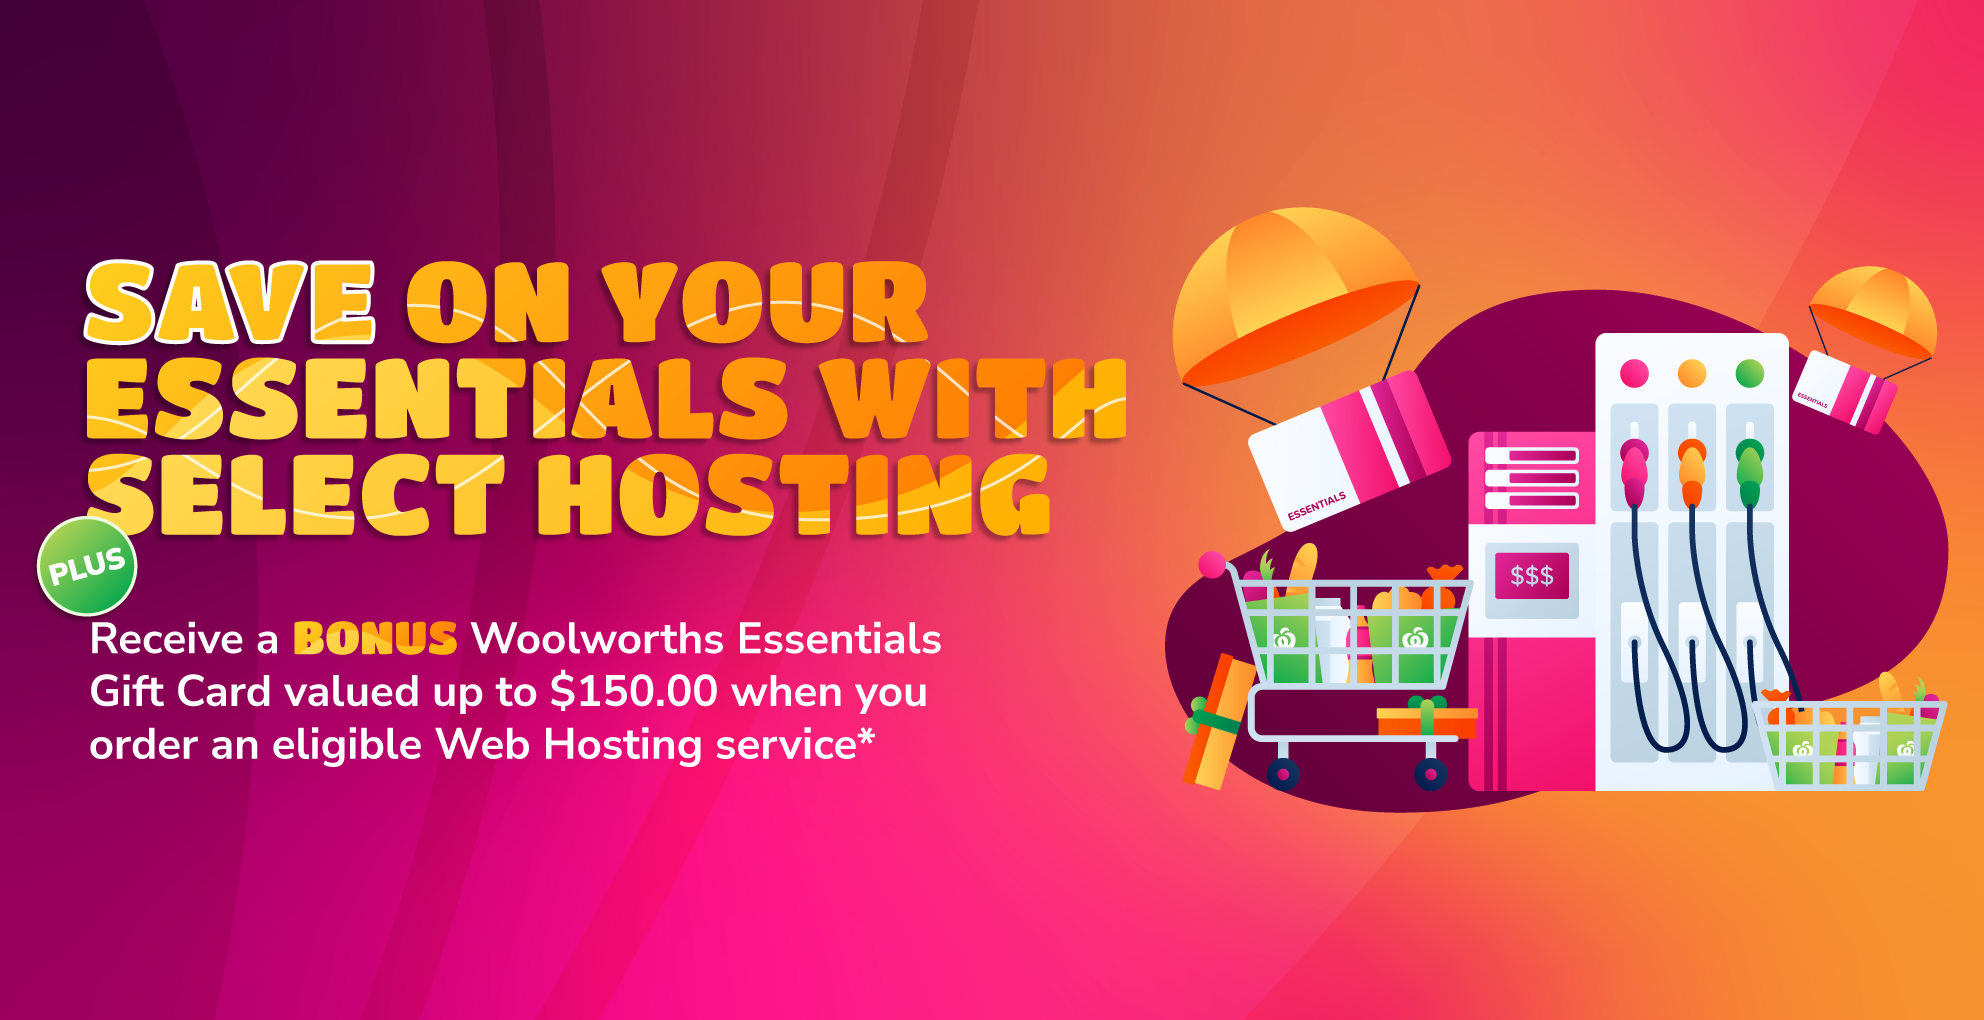 Receive a BONUS Woolworths Essentials Gift Card valued up to $150.00 with eligible Web Hosting servi